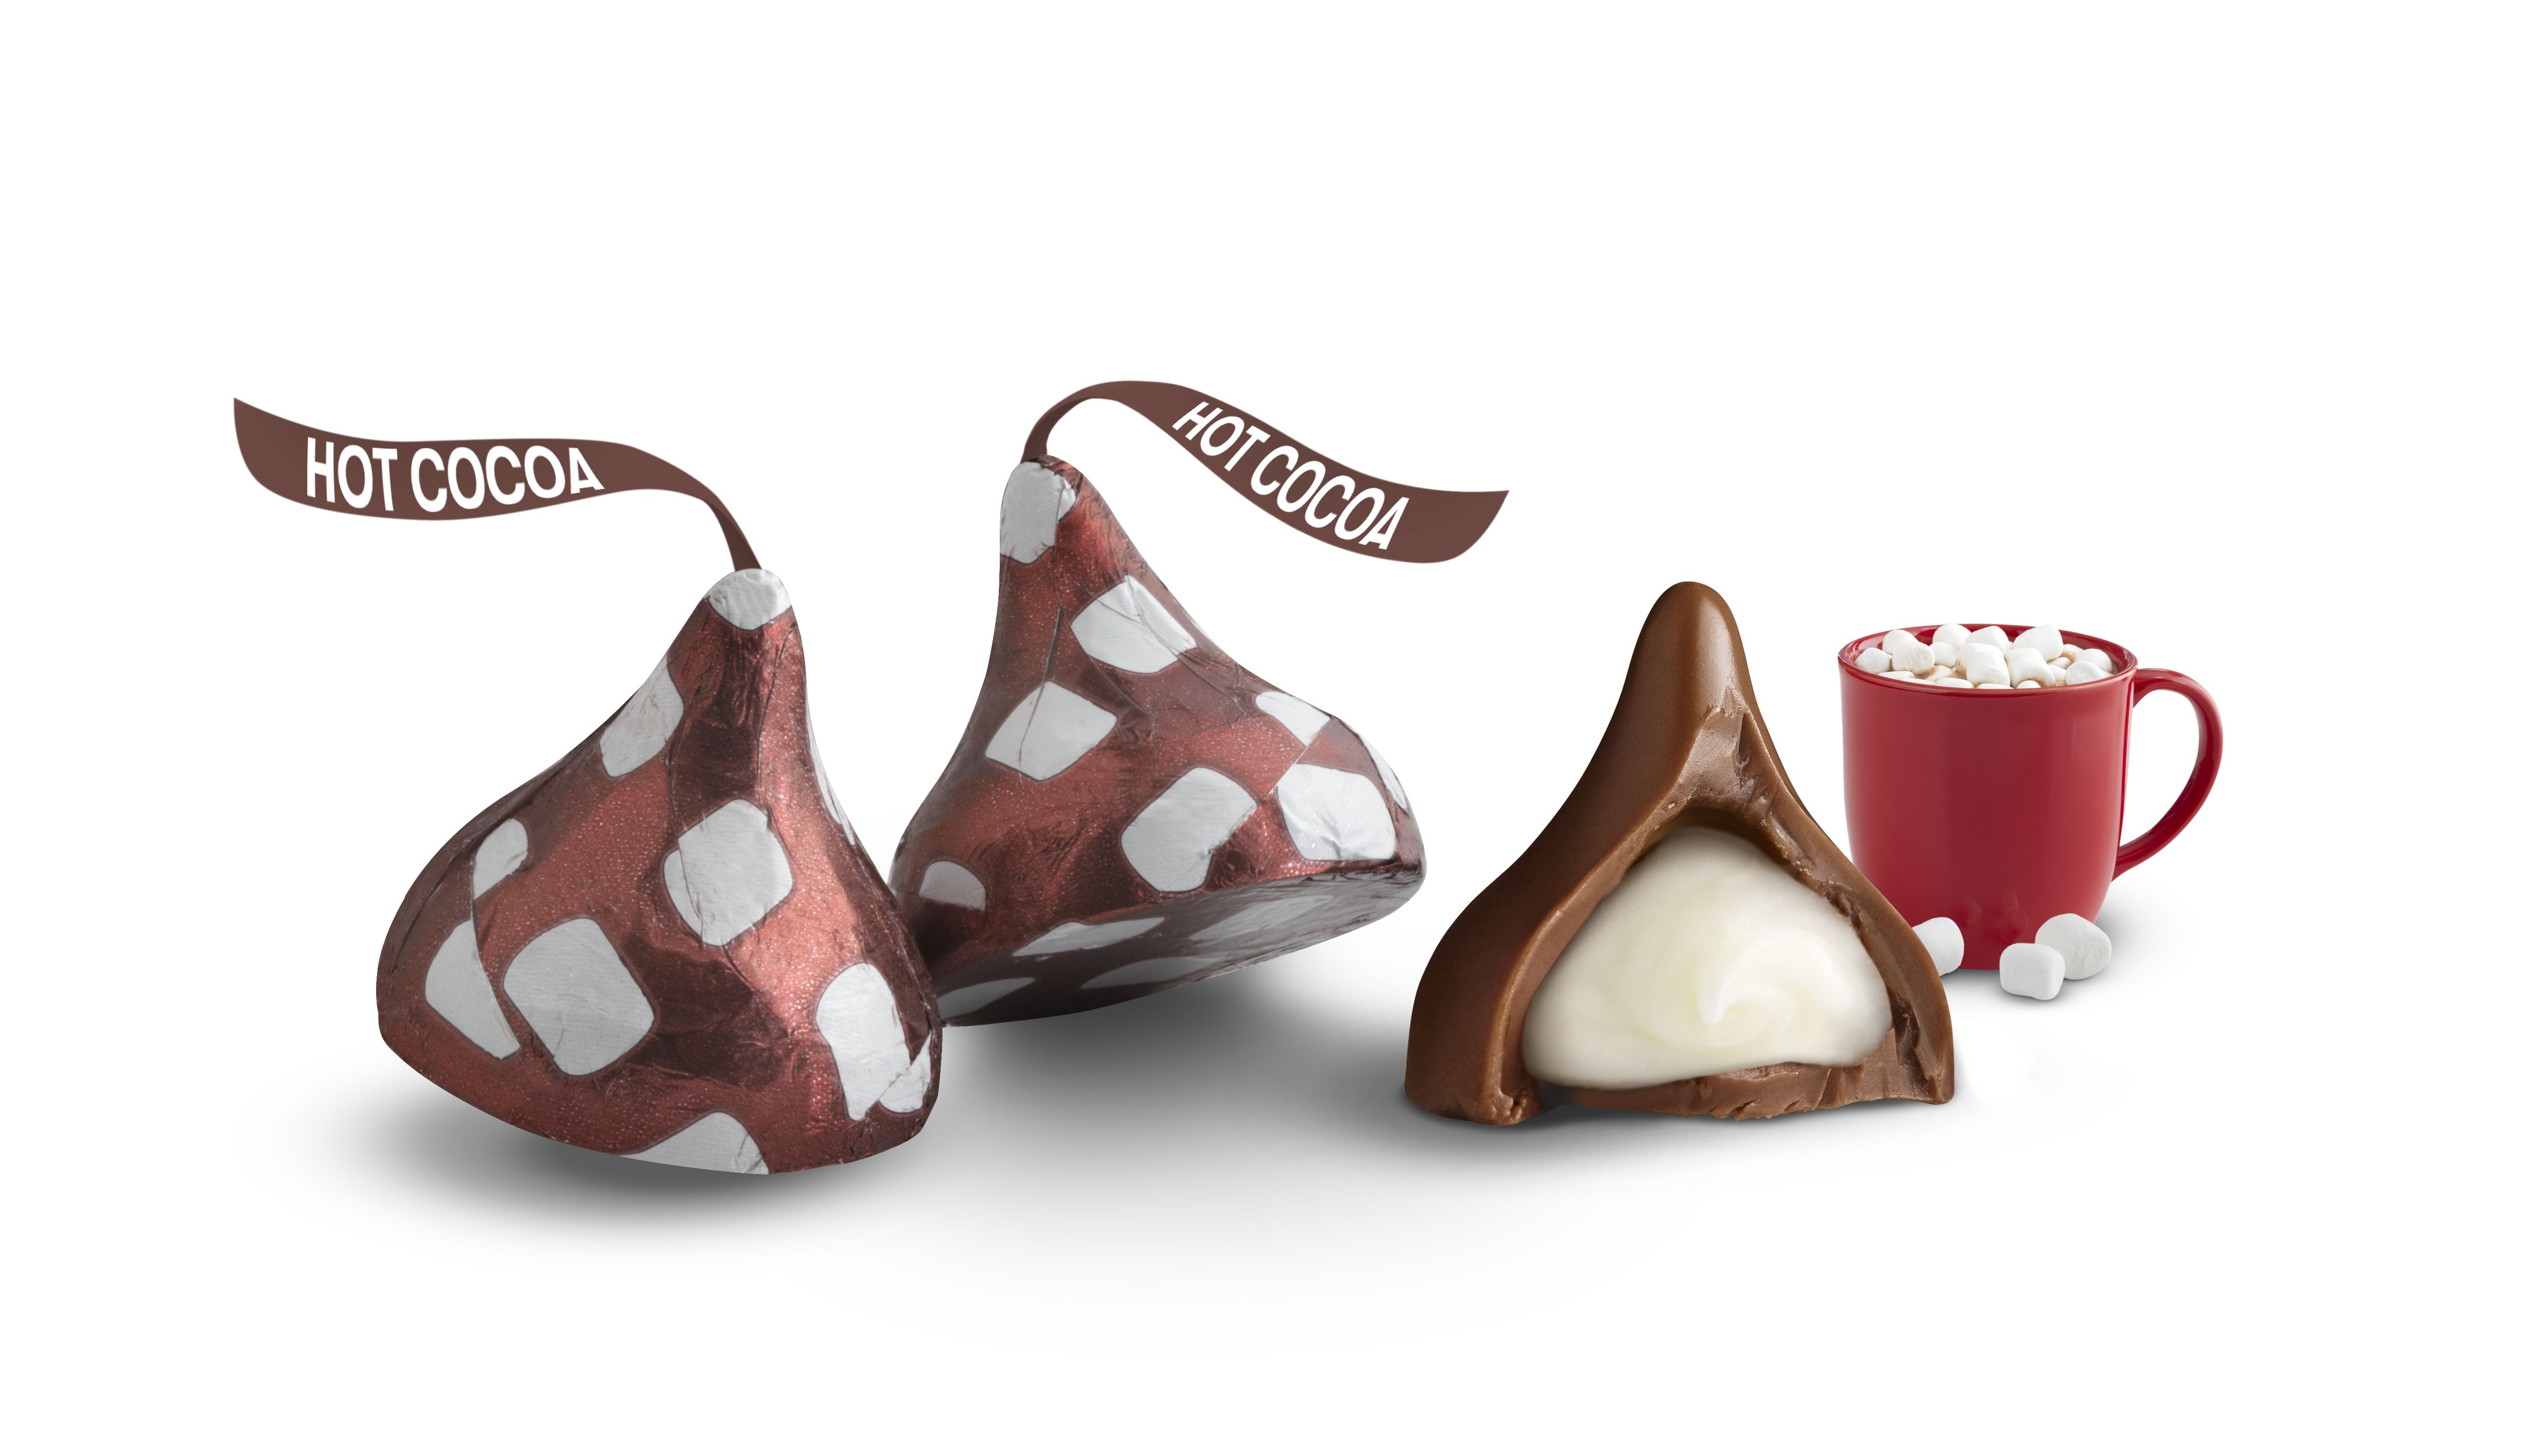 Hershey's Kisses Hot Cocoa Chocolate Candy, Holiday Bag, 10 Oz. - image 3 of 6